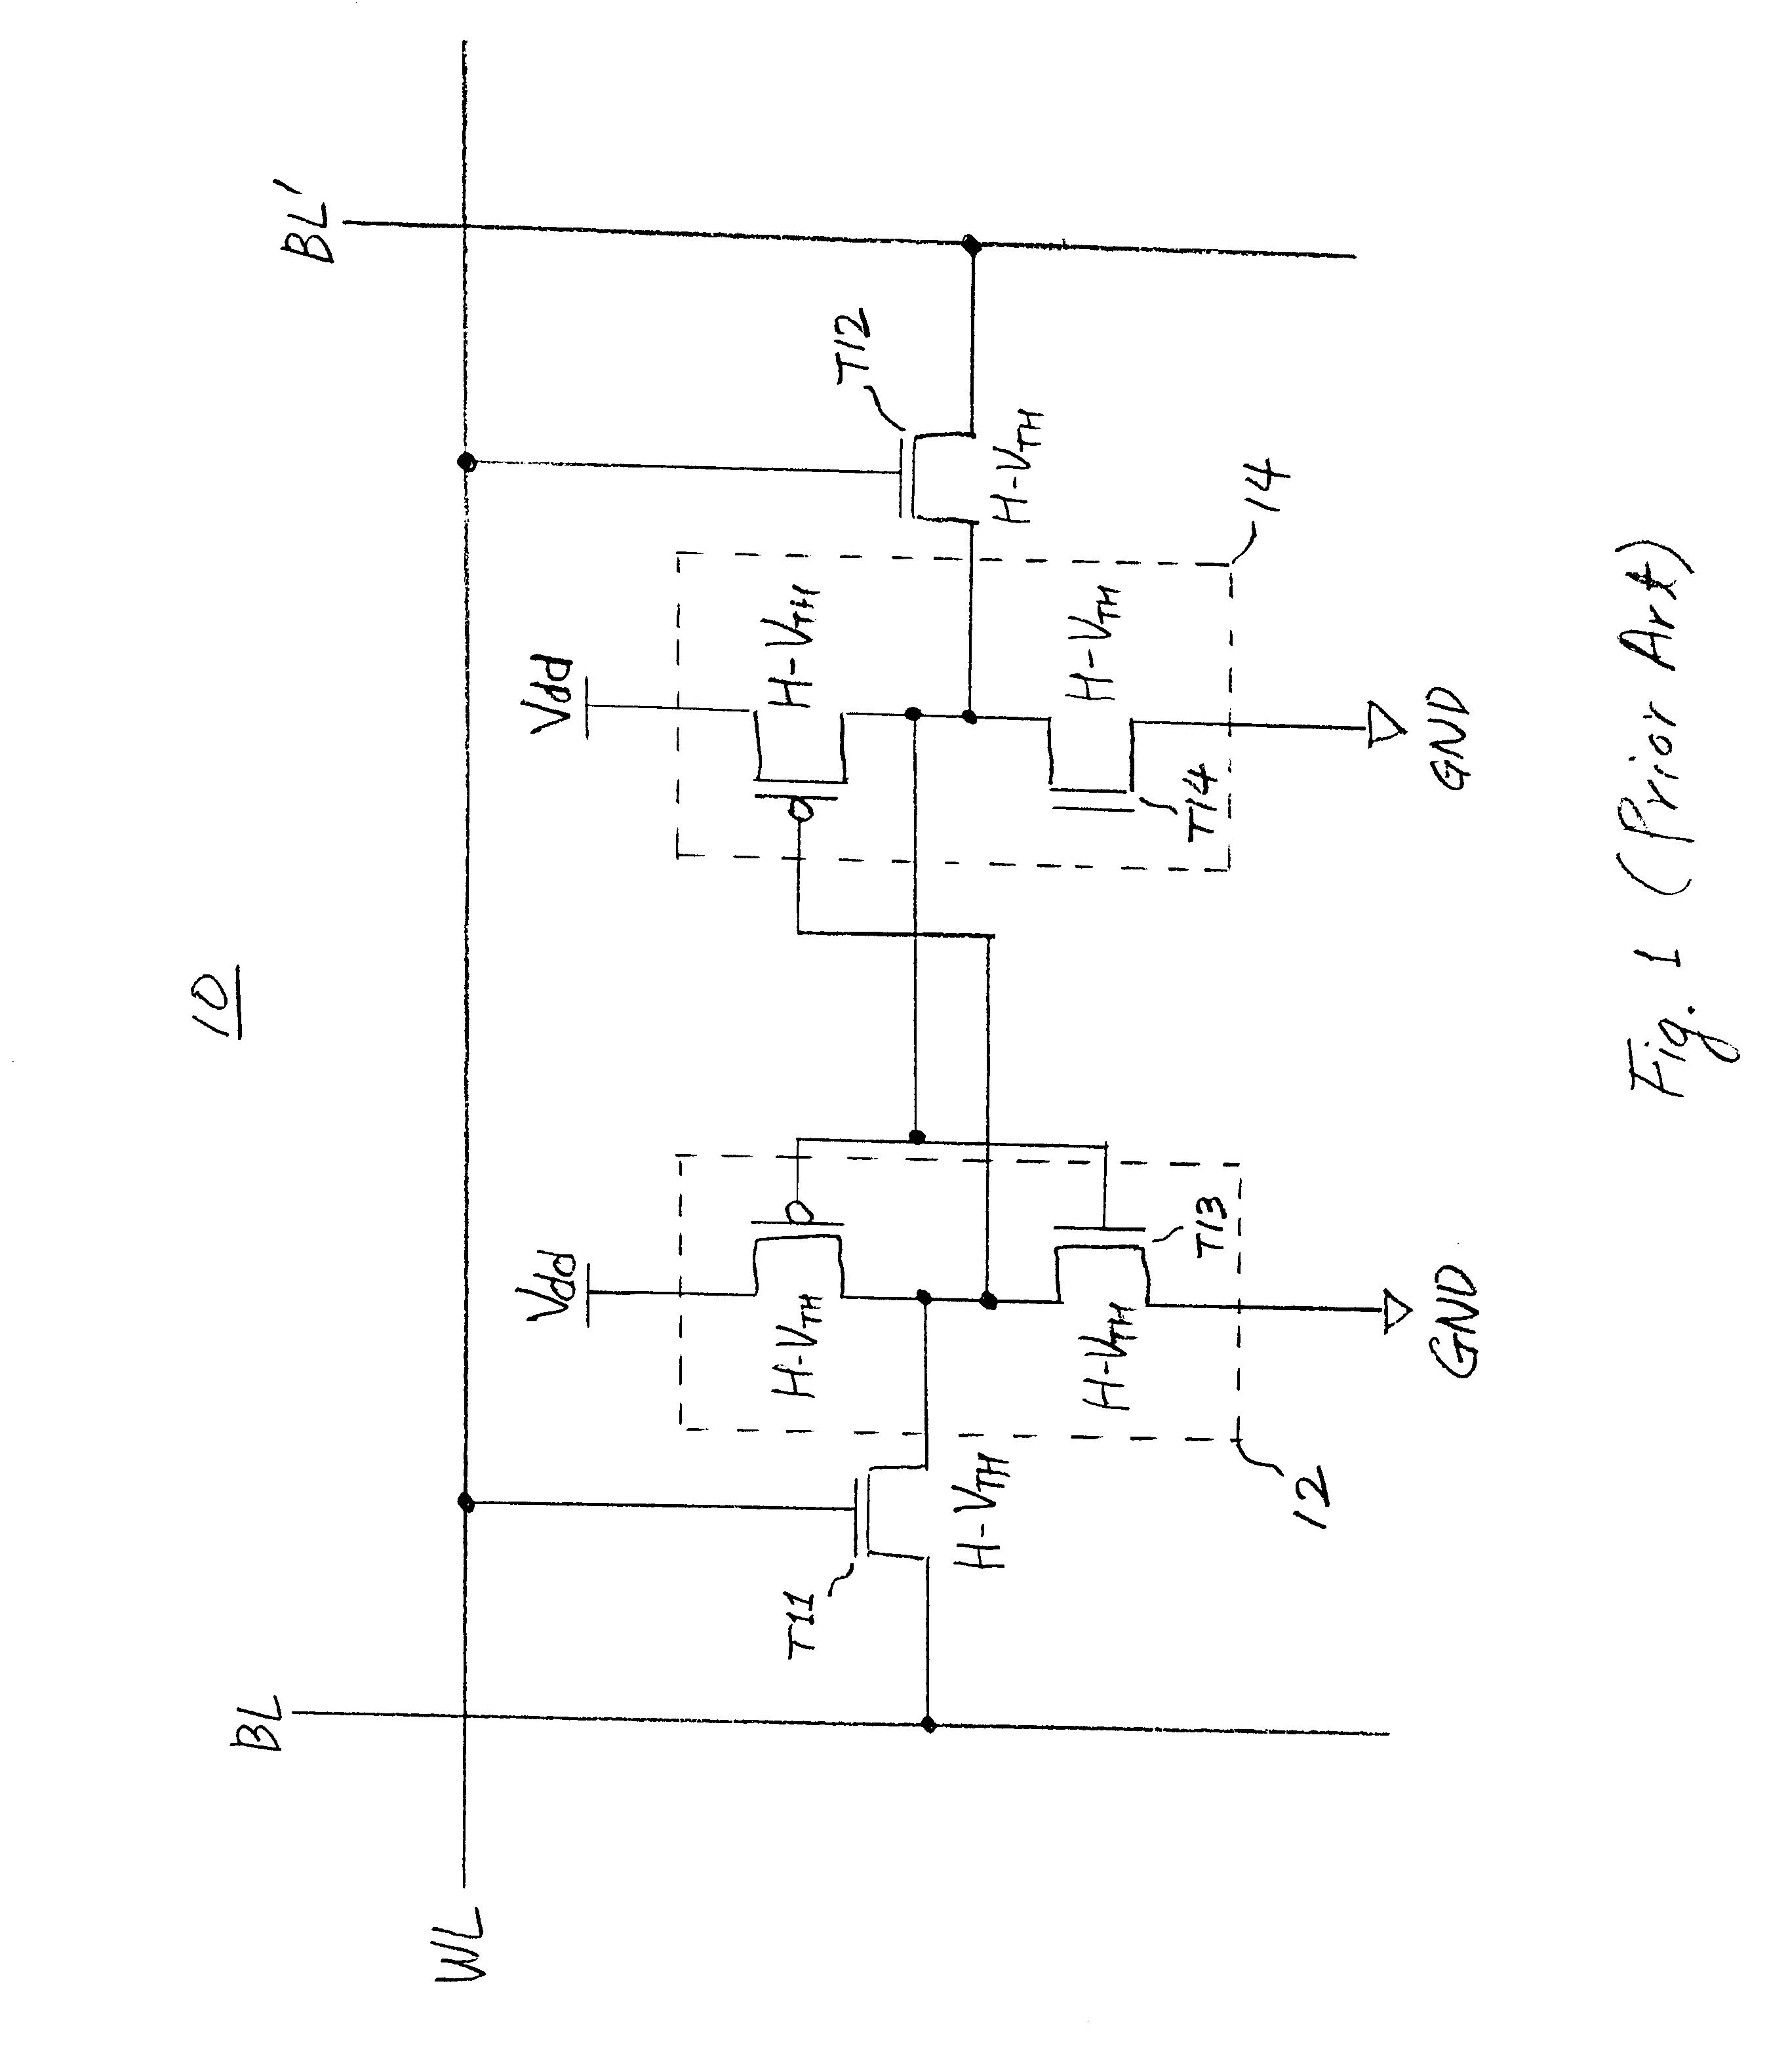 High performance semiconductor memory device with low power consumption